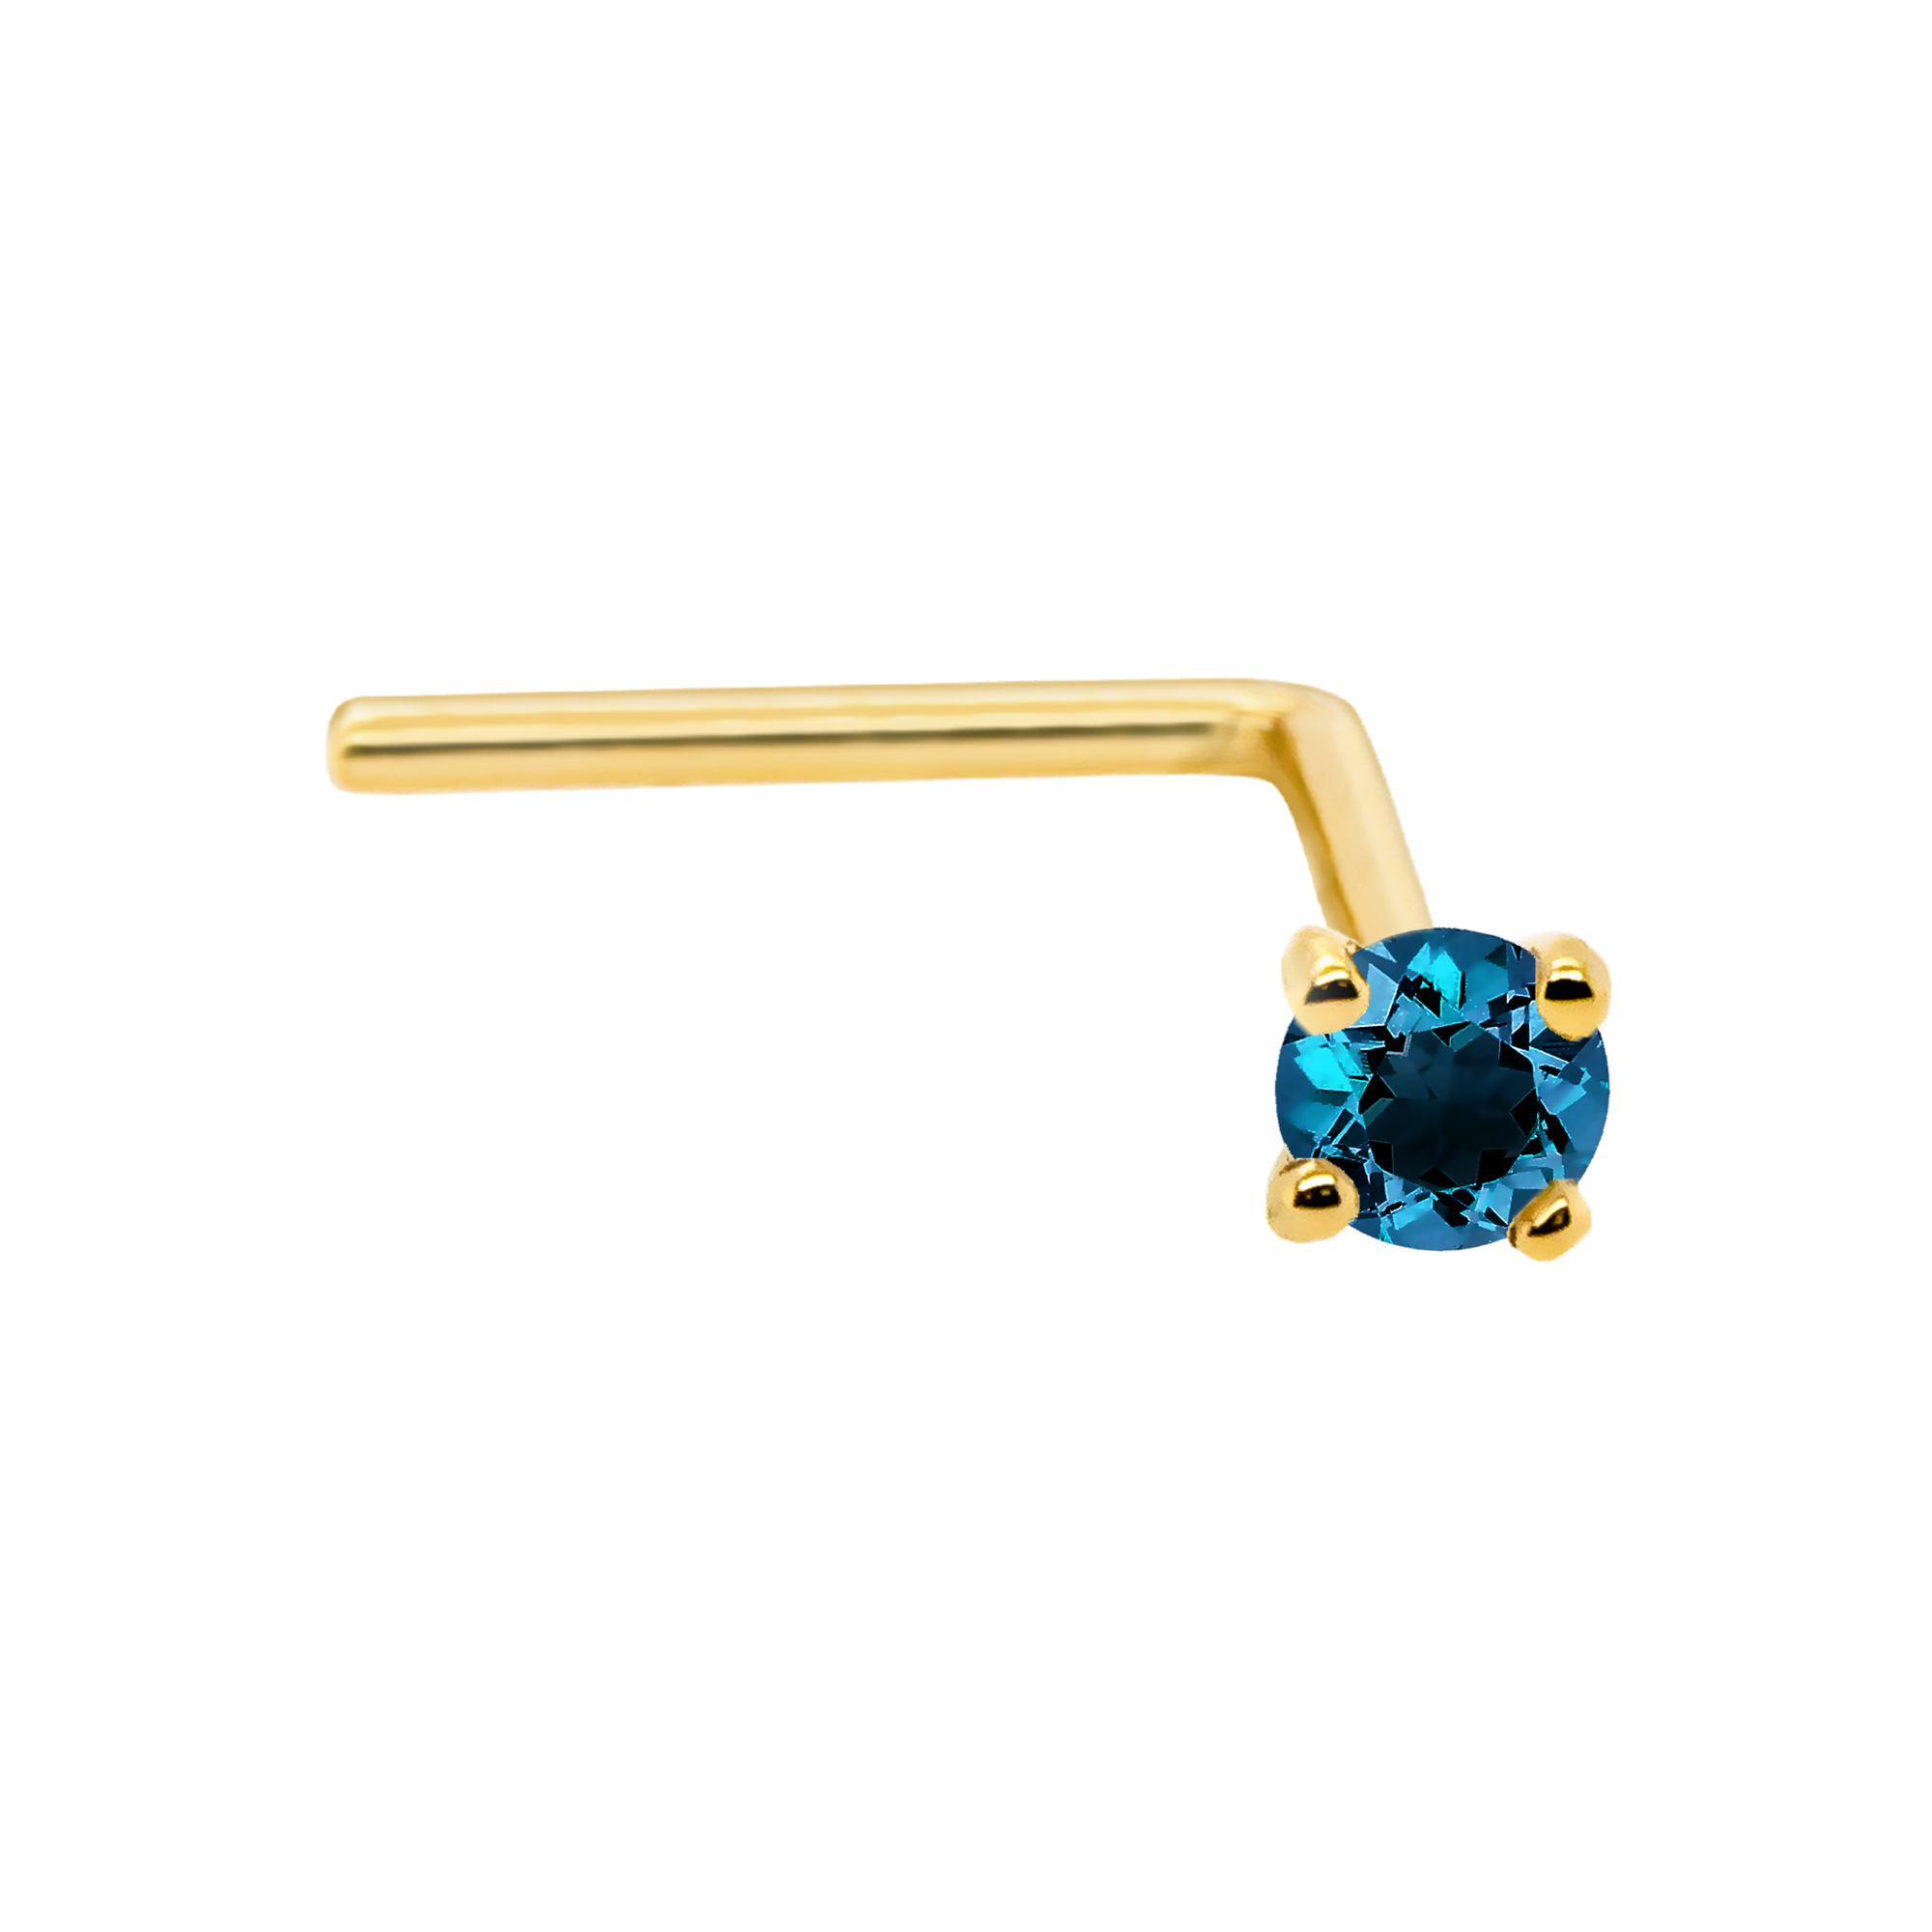 22G Solid 14Kt Gold L-Shape Nose Stud with real  Blue Diamond Gemstone, 14kt Yellow Gold or 14kt White Gold Prong Setting - April Birthstone Nose Ring